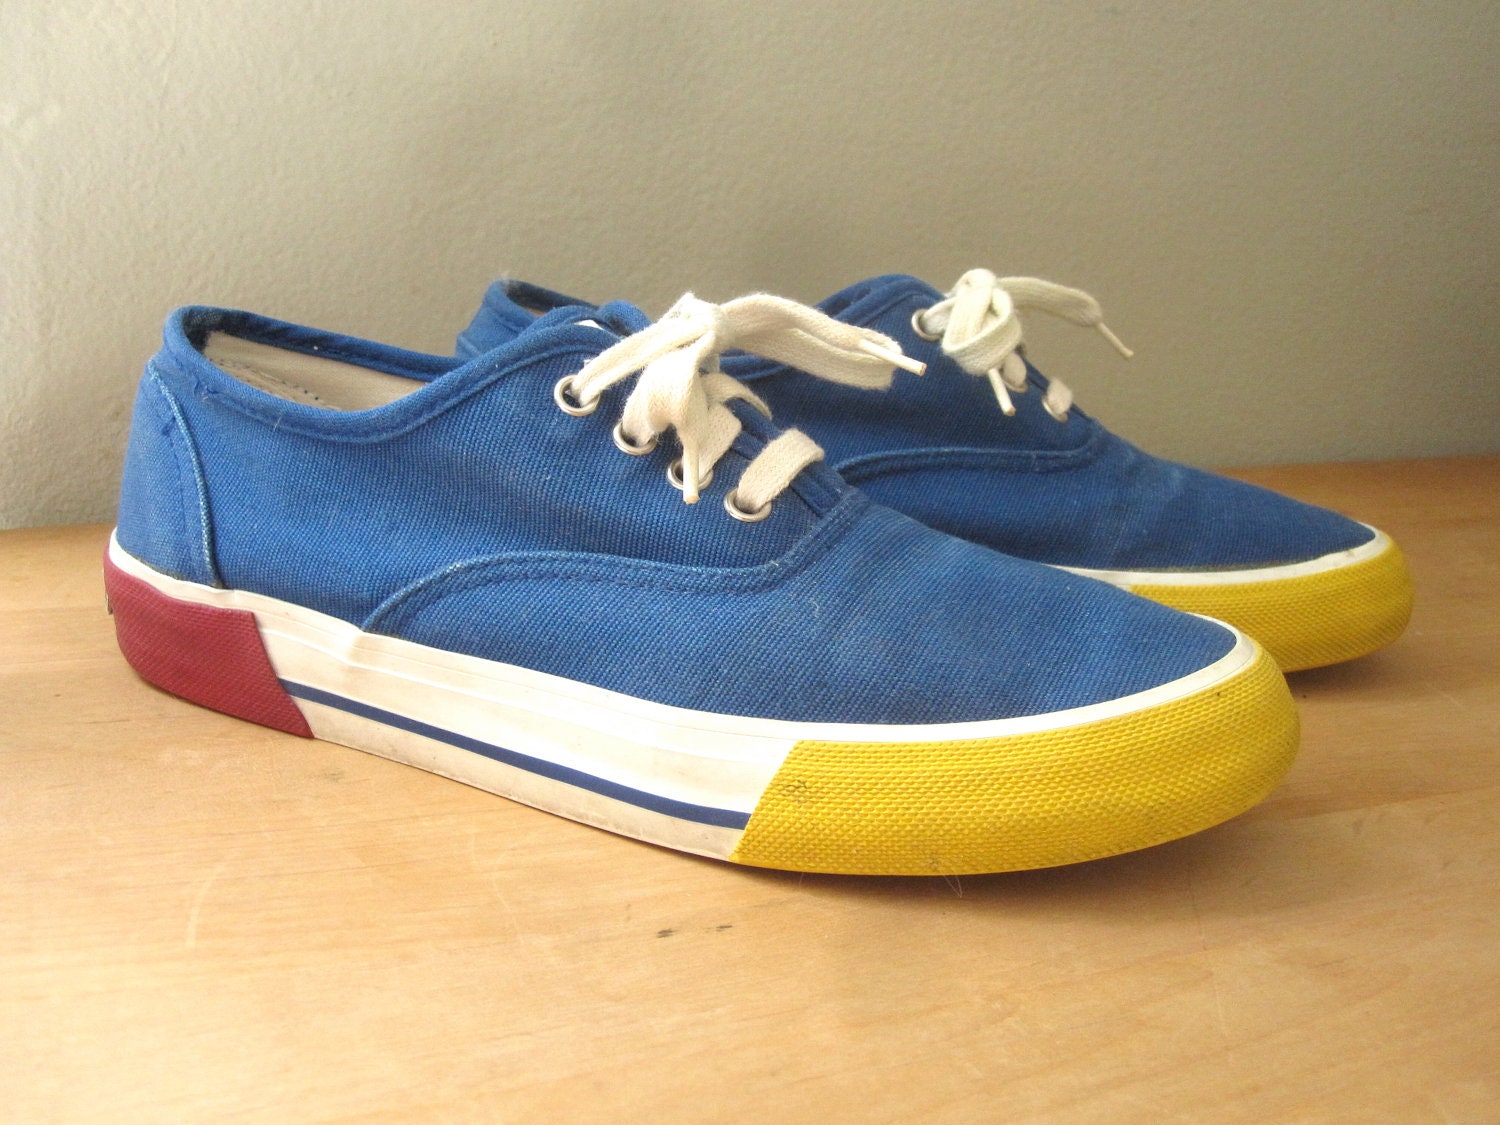 Esprit Blue Canvas Tennis Shoes with Red and Yellow Detail